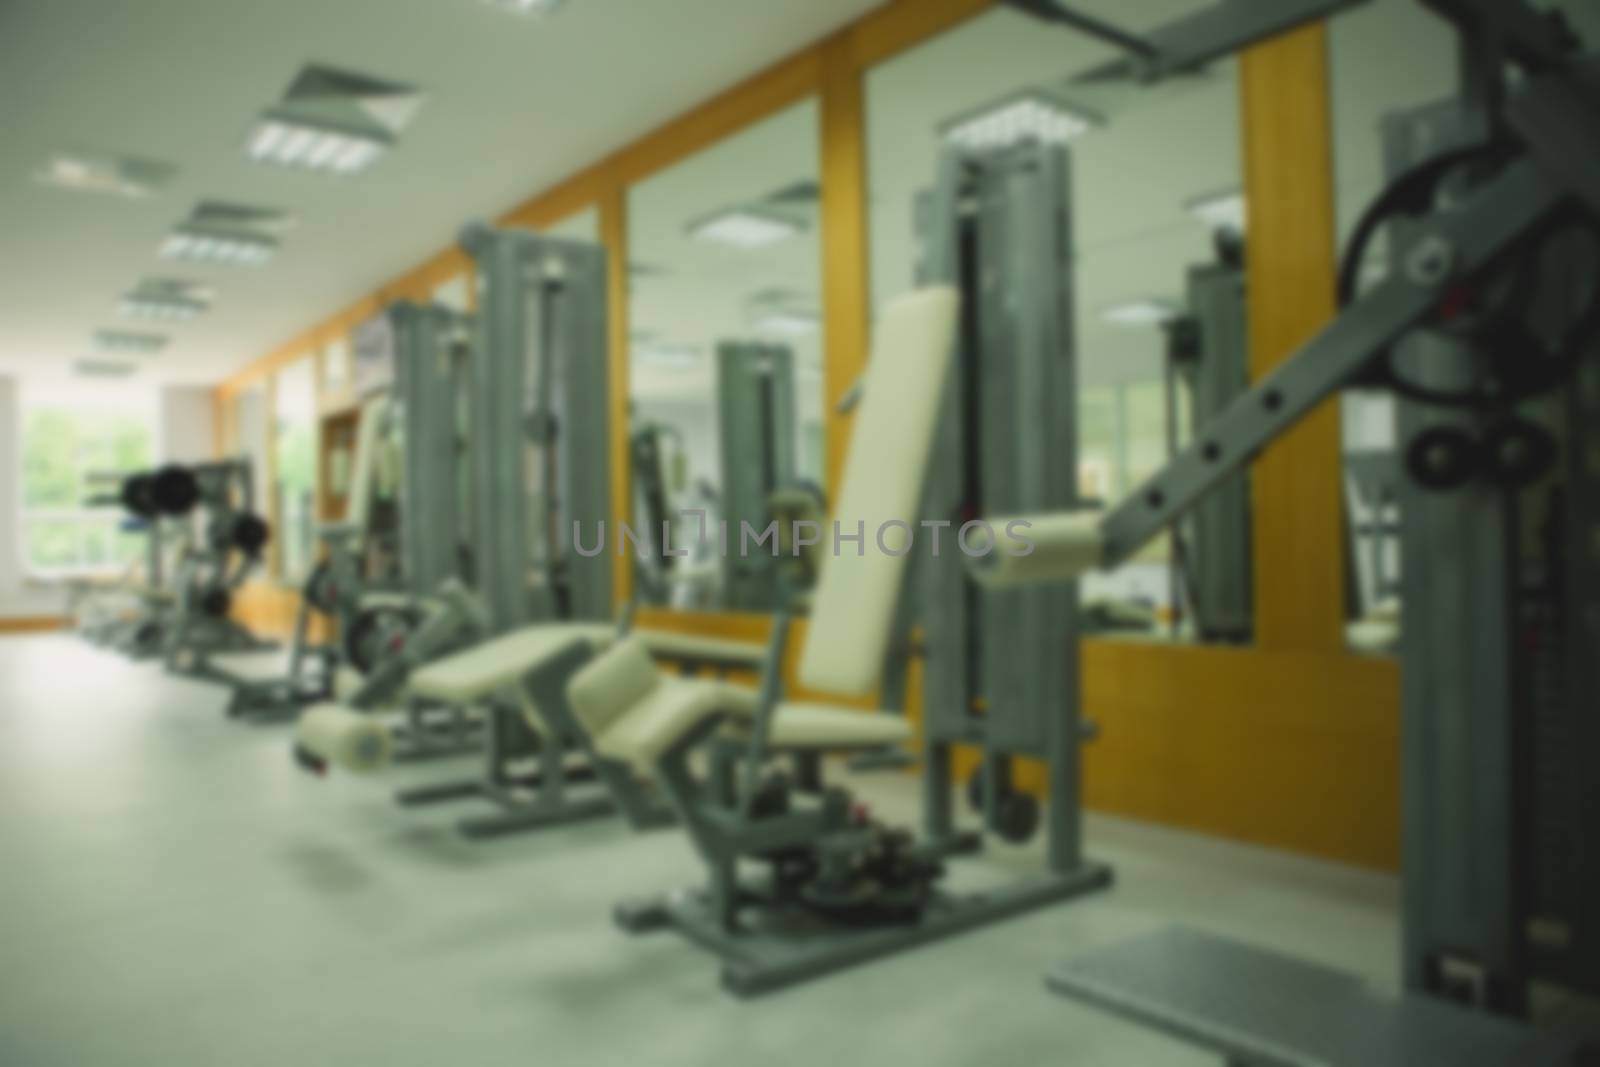 Abstract blur fitness gym background. Sport background